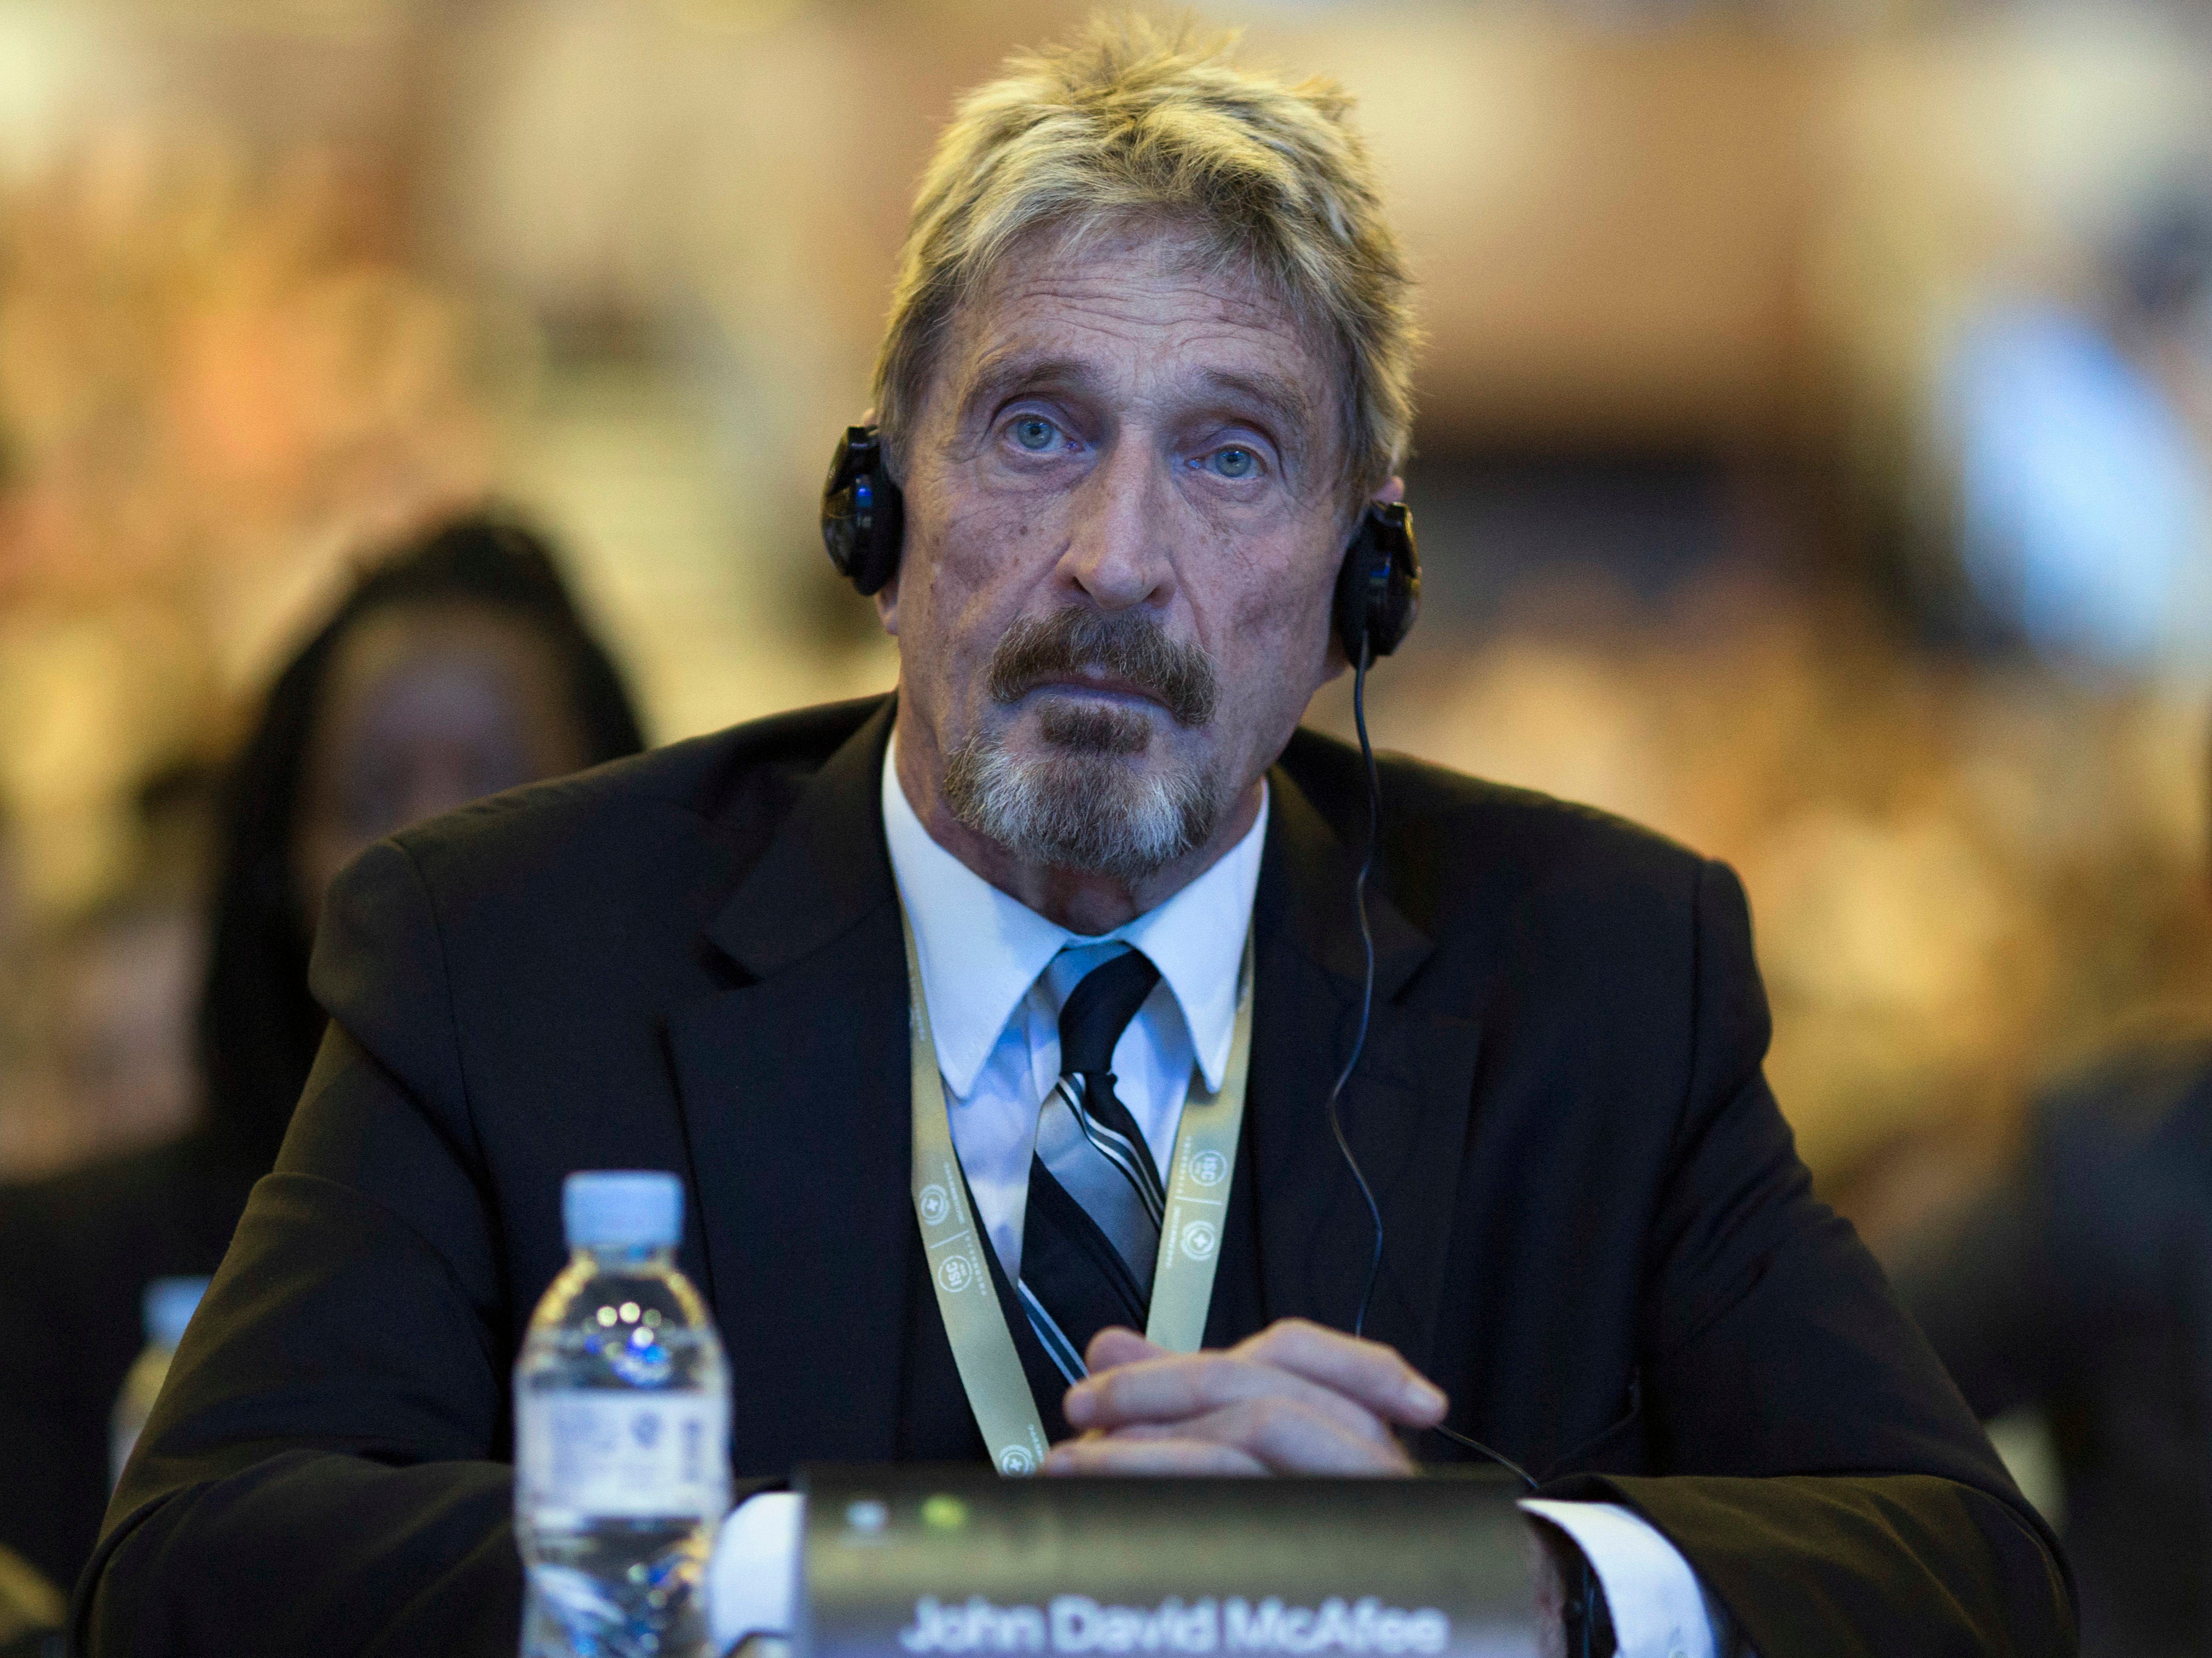 John McAfee was found dead in his prison cell on Wednesday